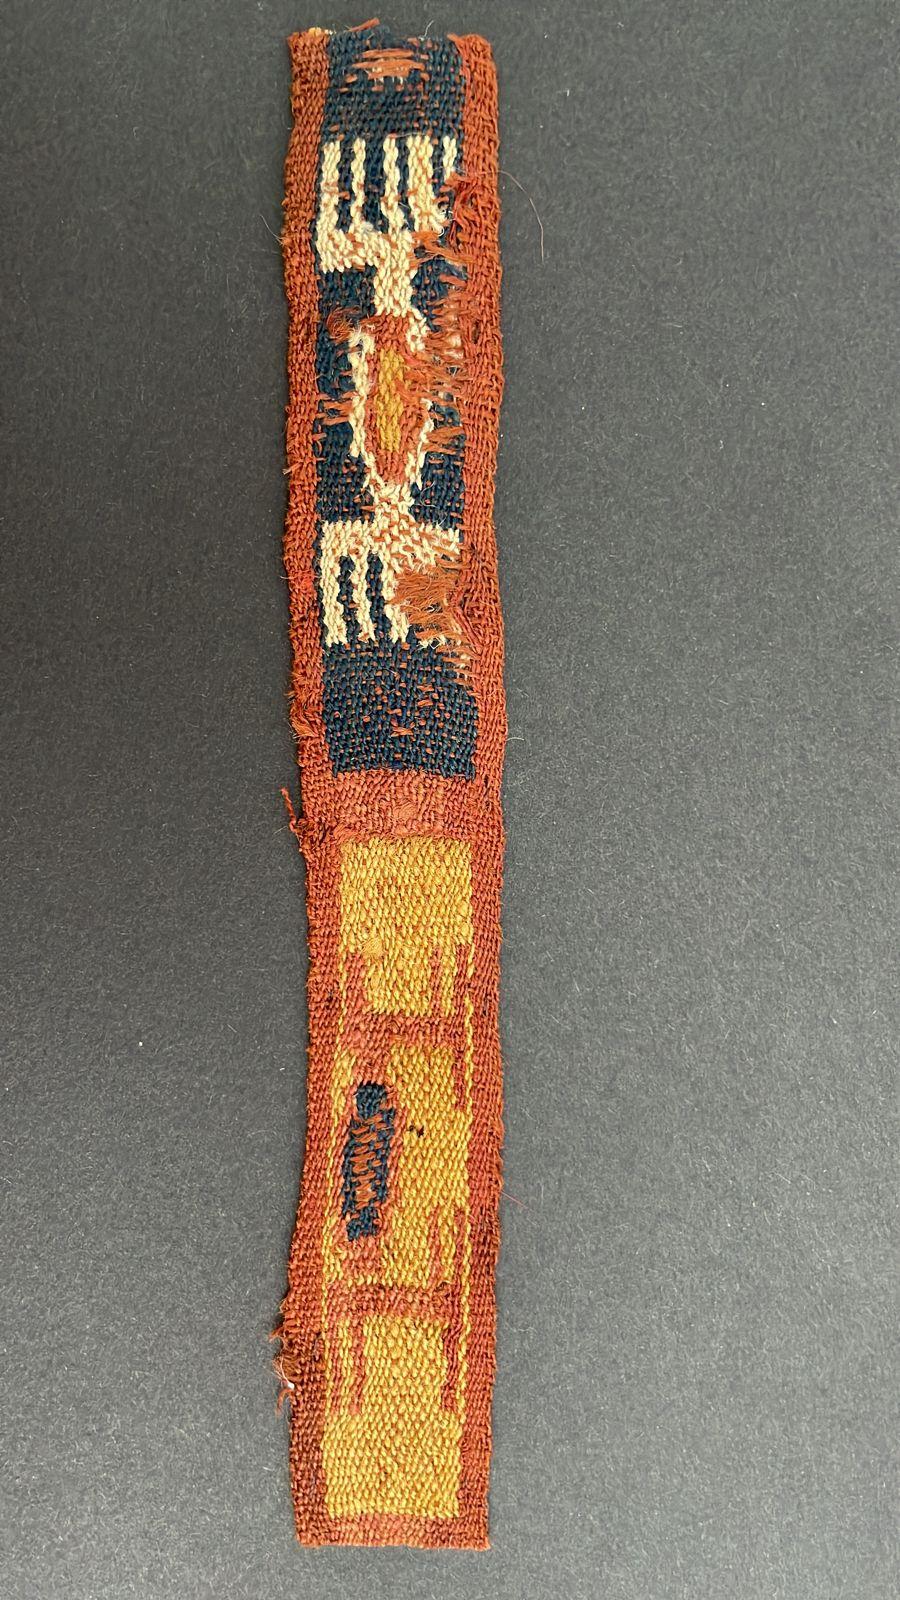 Pre-Columbian textile fragment. It is a wonder to behold antiquities such as a pre-Columbian textiles, an authentic piece of art that has been preserved for centuries and that survives generation after generation. Textiles are infinitely more